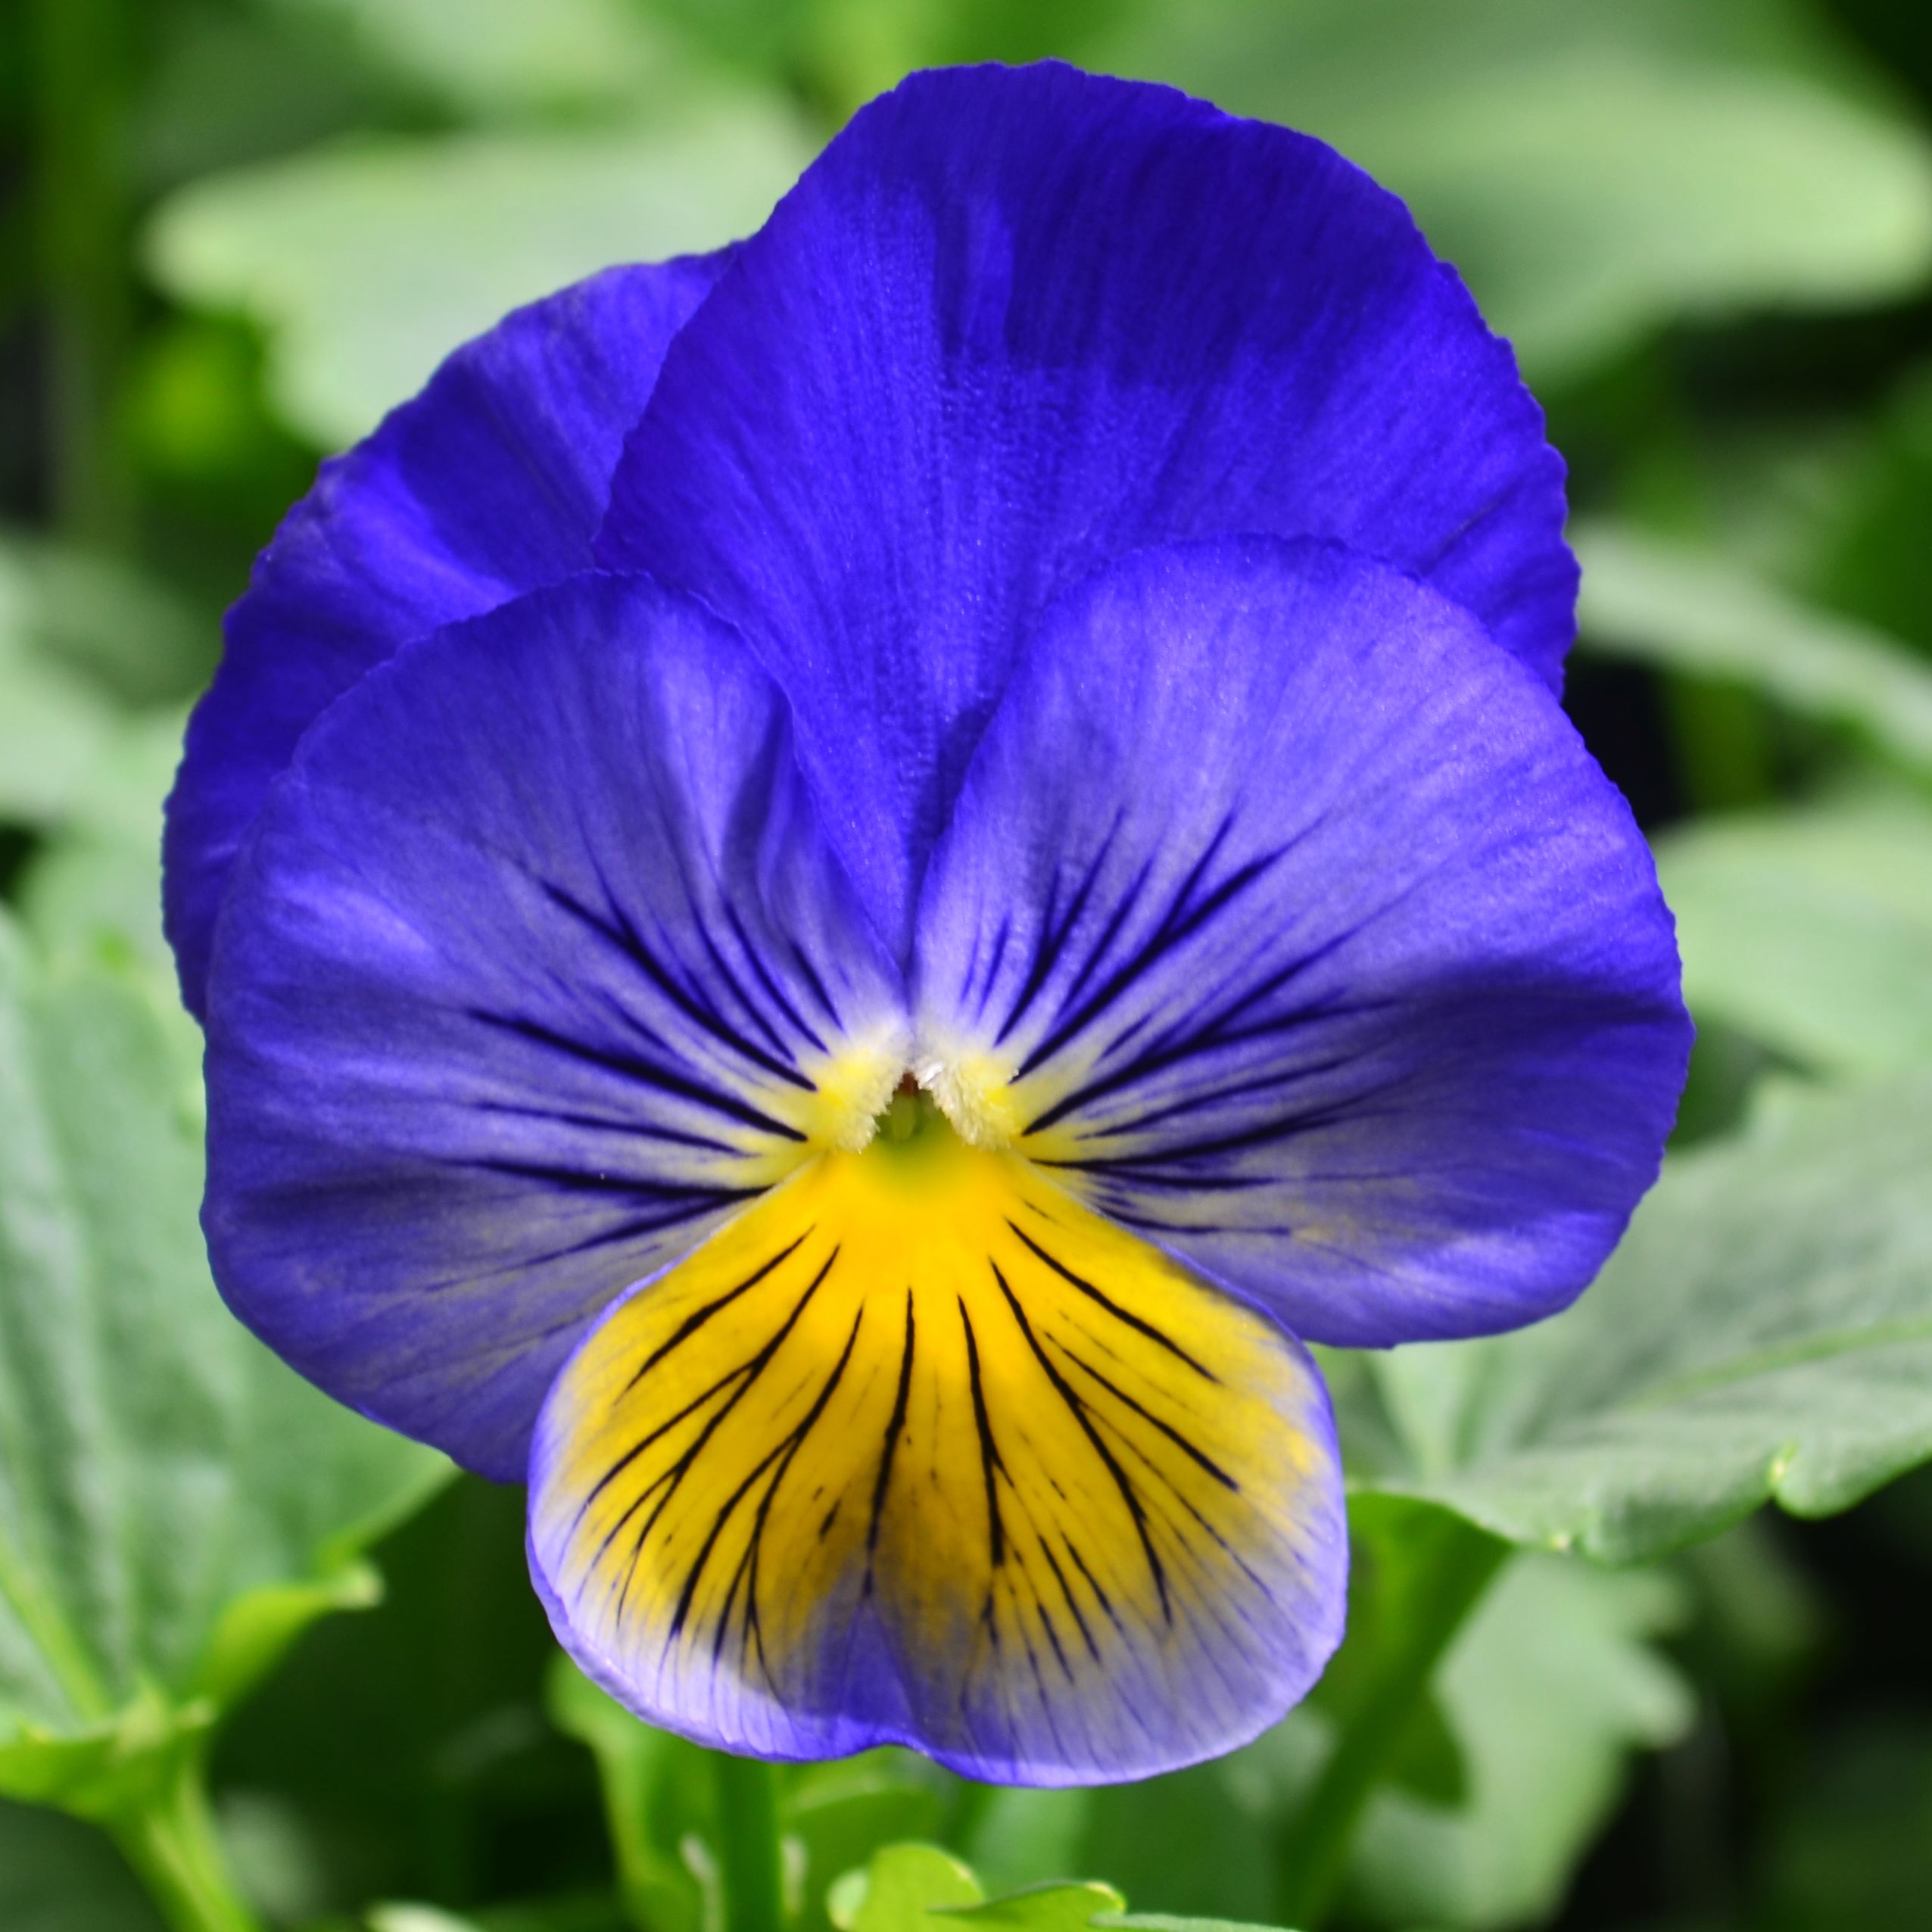 Viola wittrockiana Cats Plus 'Blue Yellow' - Pansy from Hillcrest Nursery